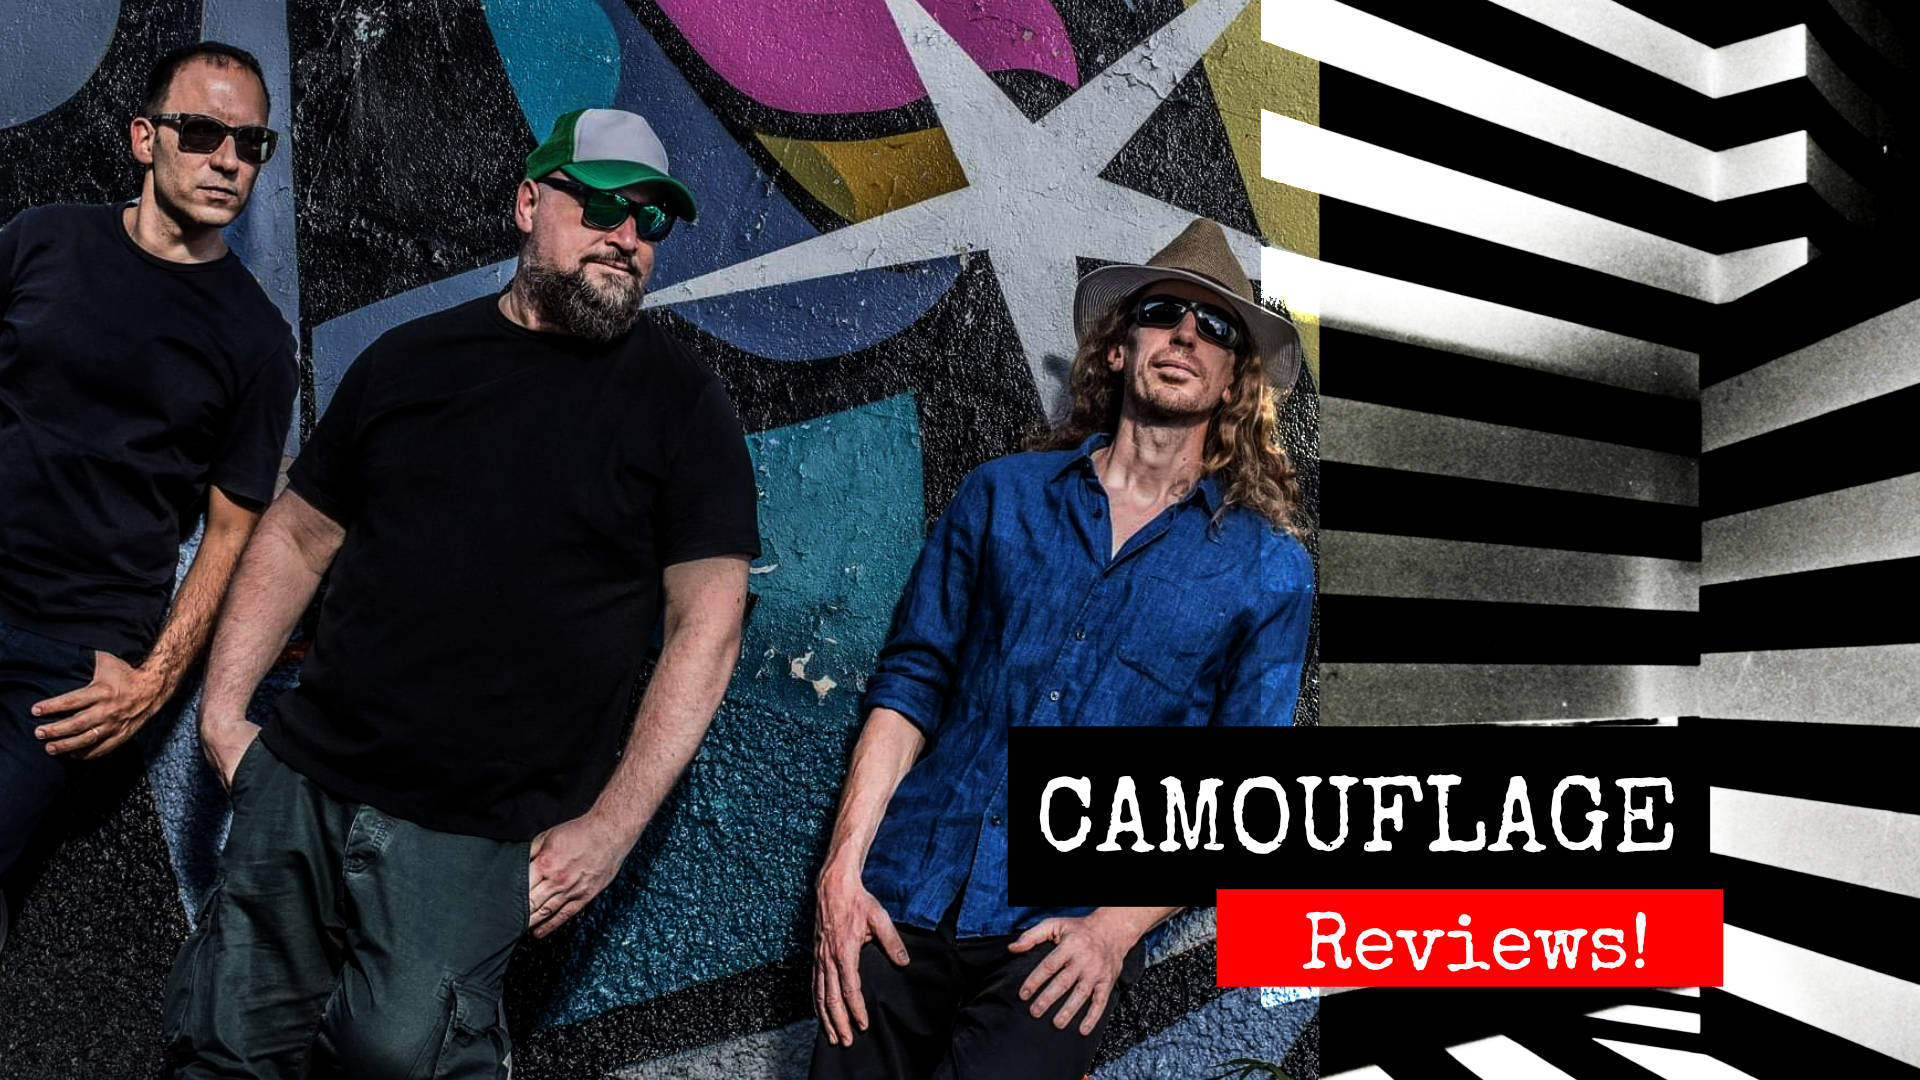 LATO - Camouflage Reviews